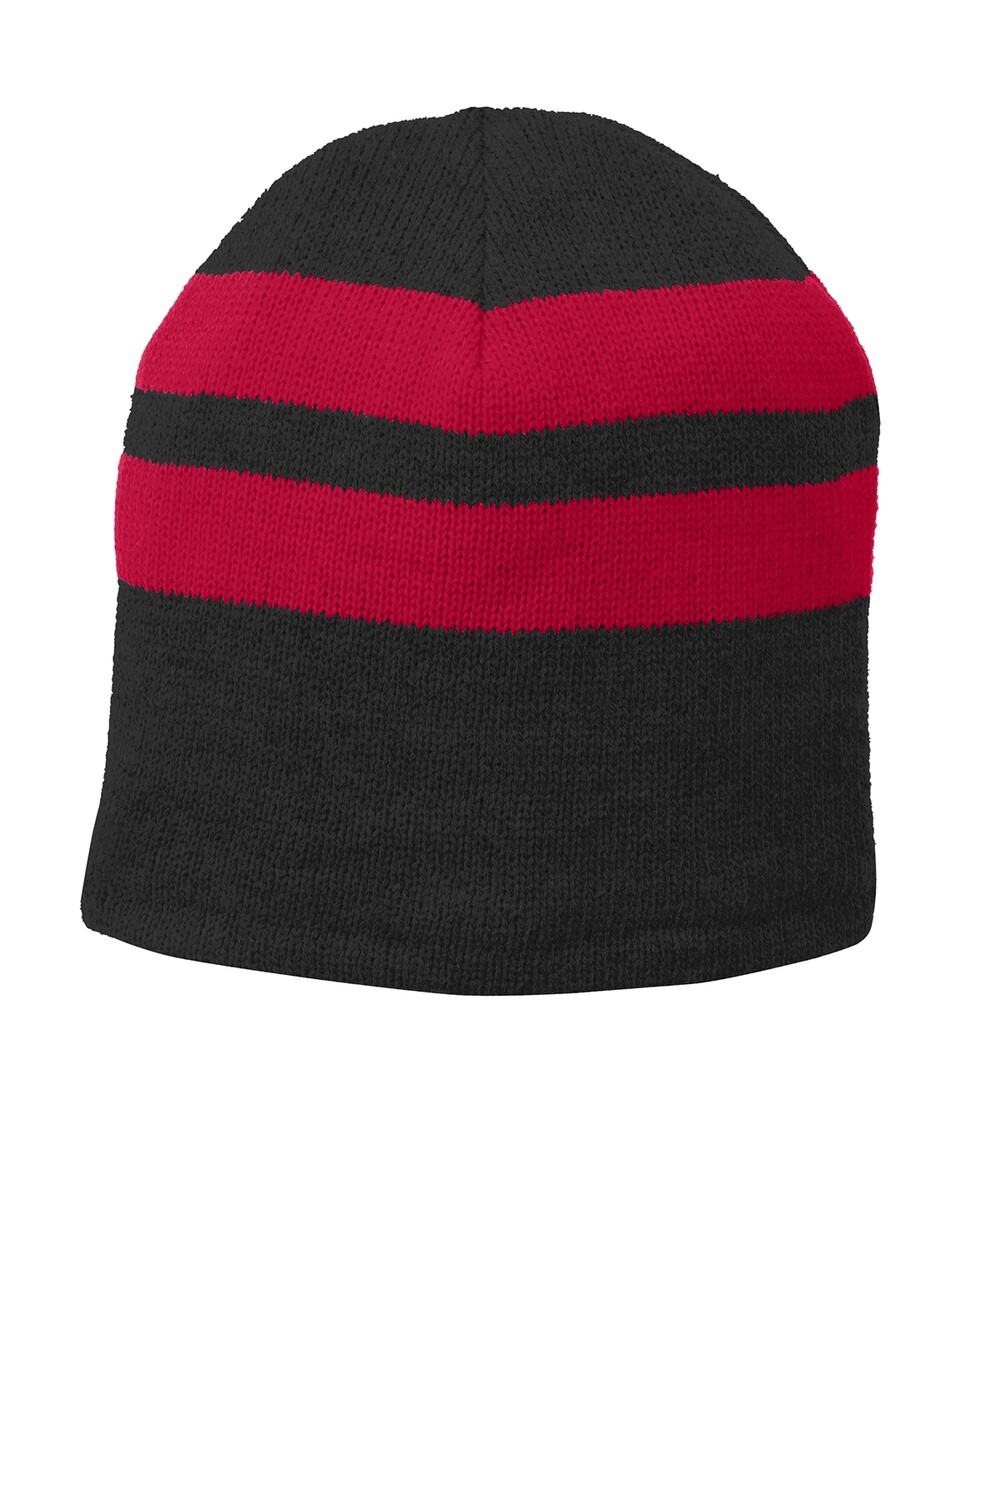 2 Color Beanie with Fleece Lining